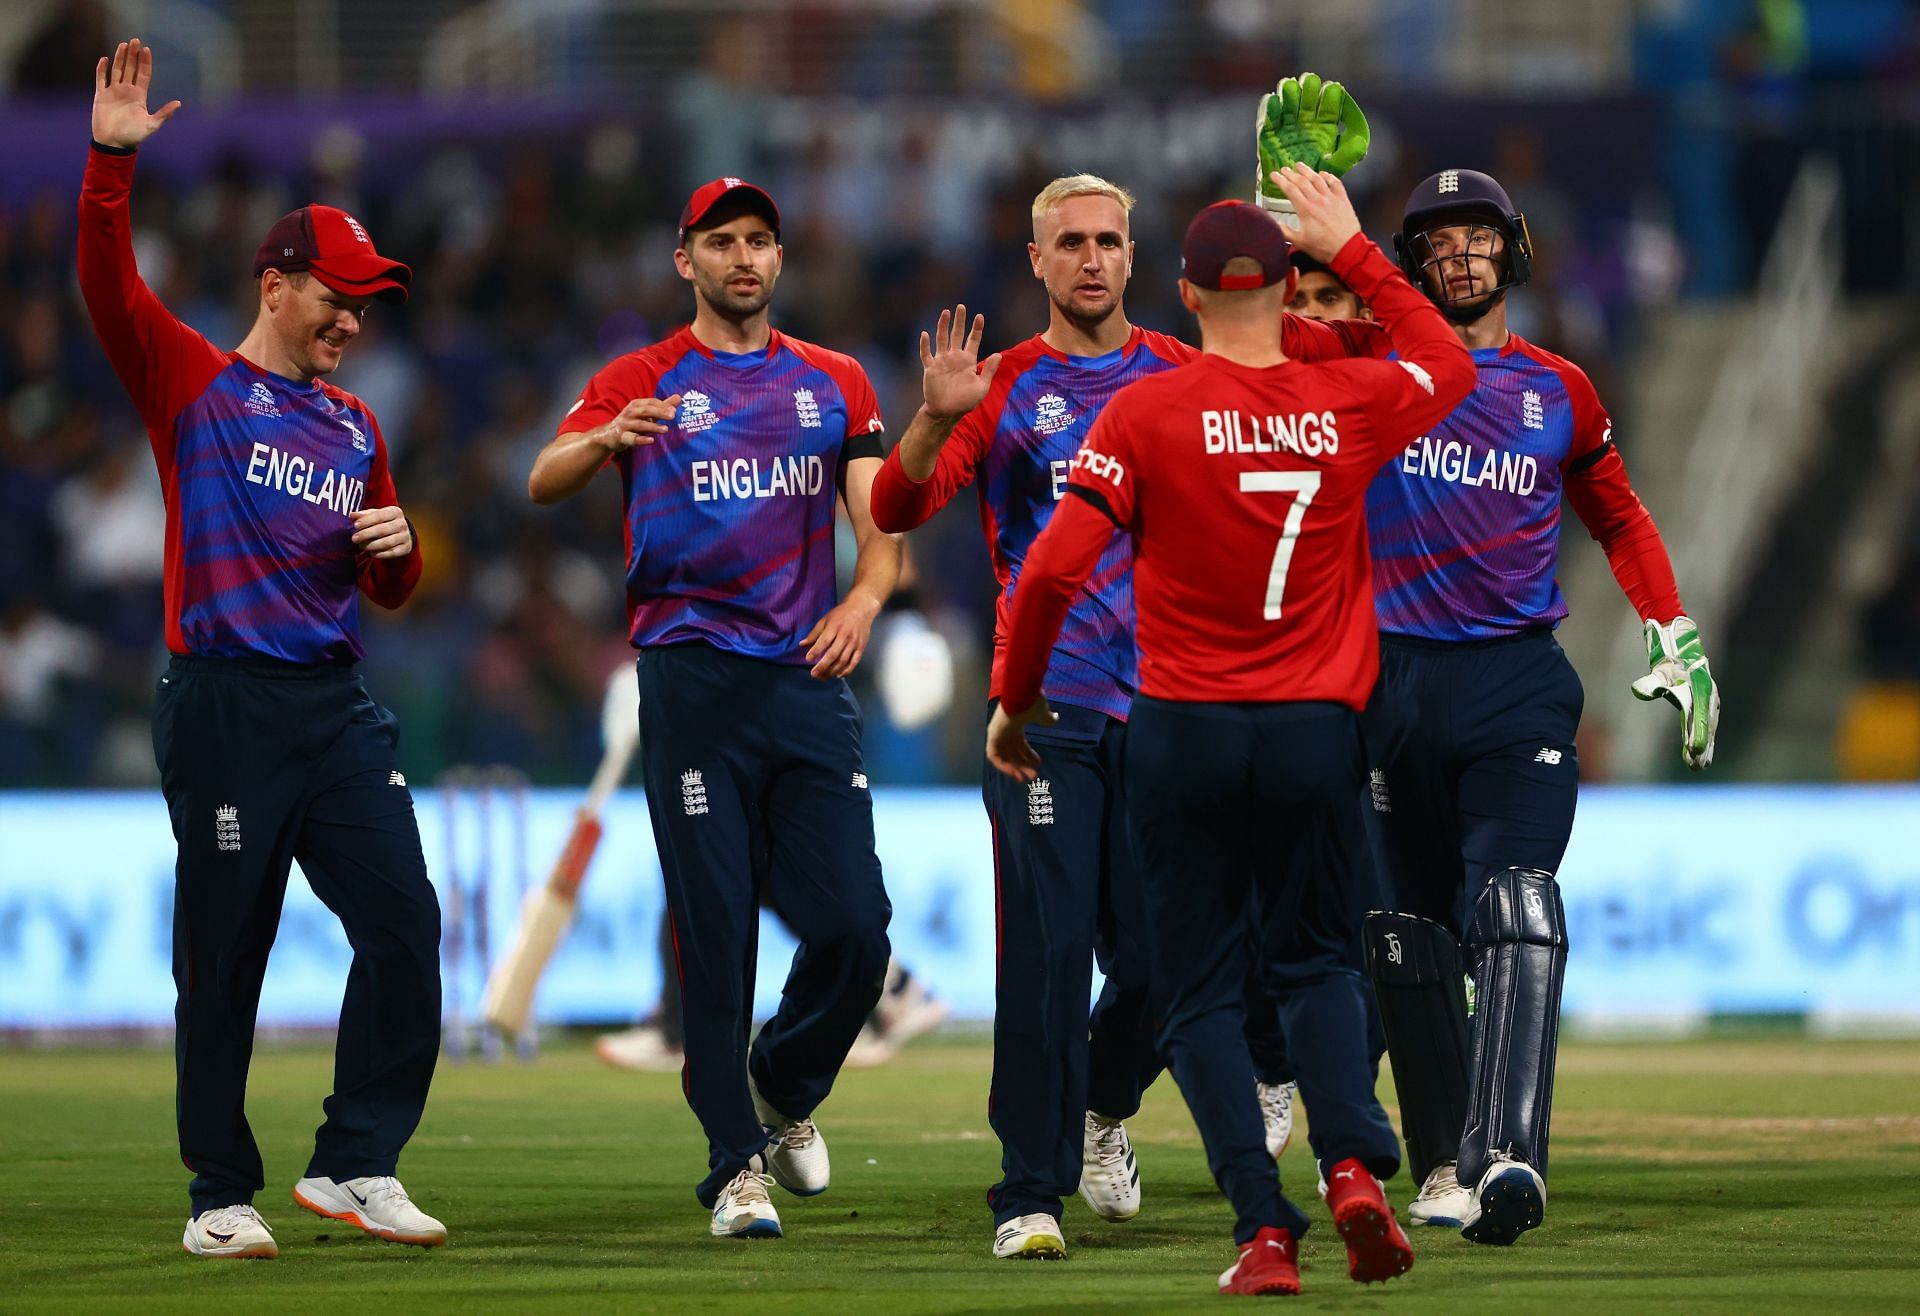 England cricket team during the T20 World Cup. Pic: Getty Images